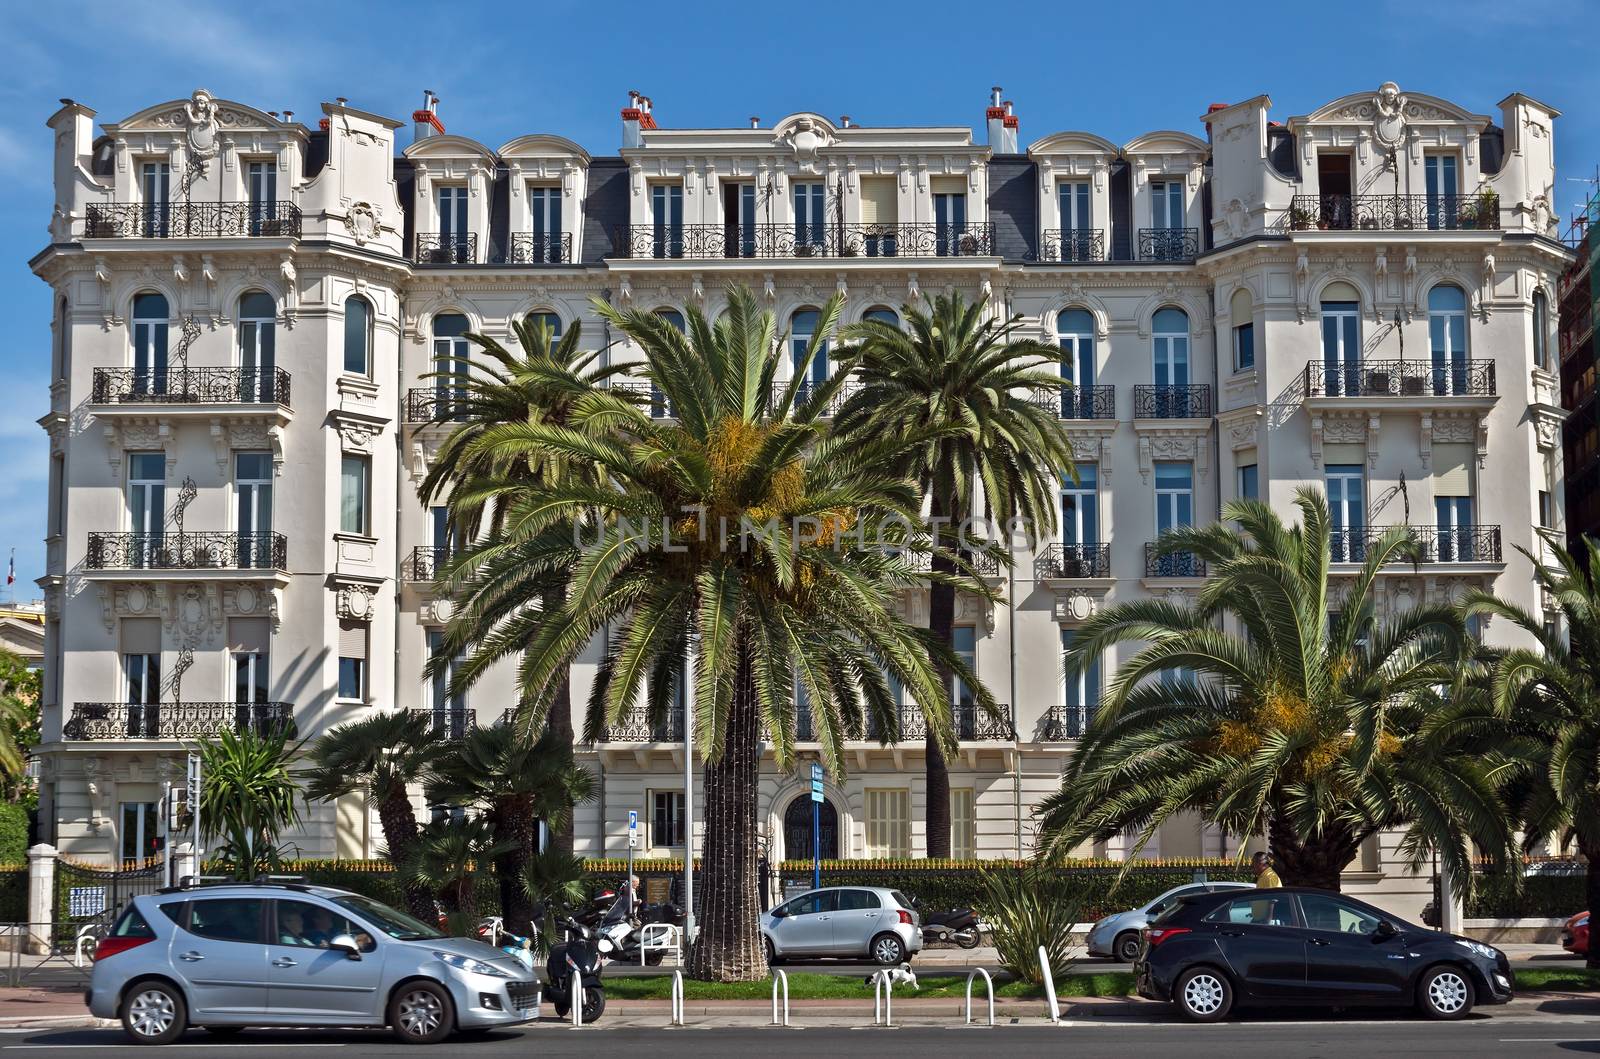 NICE, FRANCE - JUNE 6, 2014: Architecture along Promenade des Anglais. Promenade des Anglais is a symbol of the Cote d'Azur and was built in 1830 at the expense of the British colony.

Nice, France - June 6, 2014: Architecture along Promenade des Anglais. Promenade des Anglais is a symbol of the Cote d'Azur and was built in 1830 at the expense of the British colony.